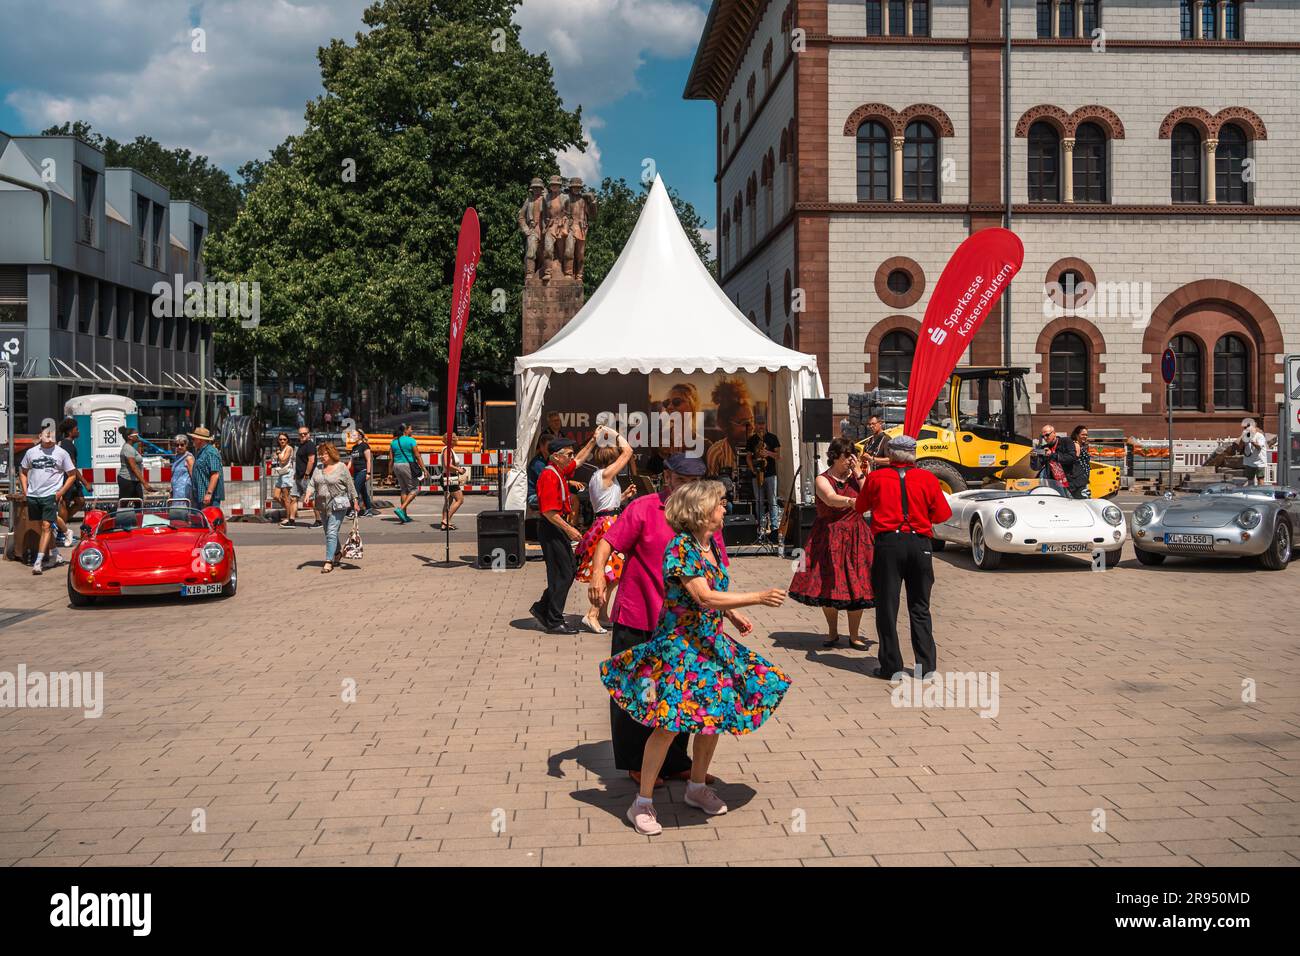 Kaiserslautern, Germany. 24th June, 2023. Couples dancing in the summer heat during live music performance at Schillerplatz (Square). The 15th Kaiserslautern Classics combines a vintage car show with the former ADAC Trifels Historic rallye (now under the new 'ADAC Trifels Oldtimerwanderung' name) and a Vespa meeting. The event starts on Saturday 8:30 AM and continues at various public locations downtown through the day, accompanied by live music bands. Credit: Gustav Zygmund/Alamy News Stock Photo